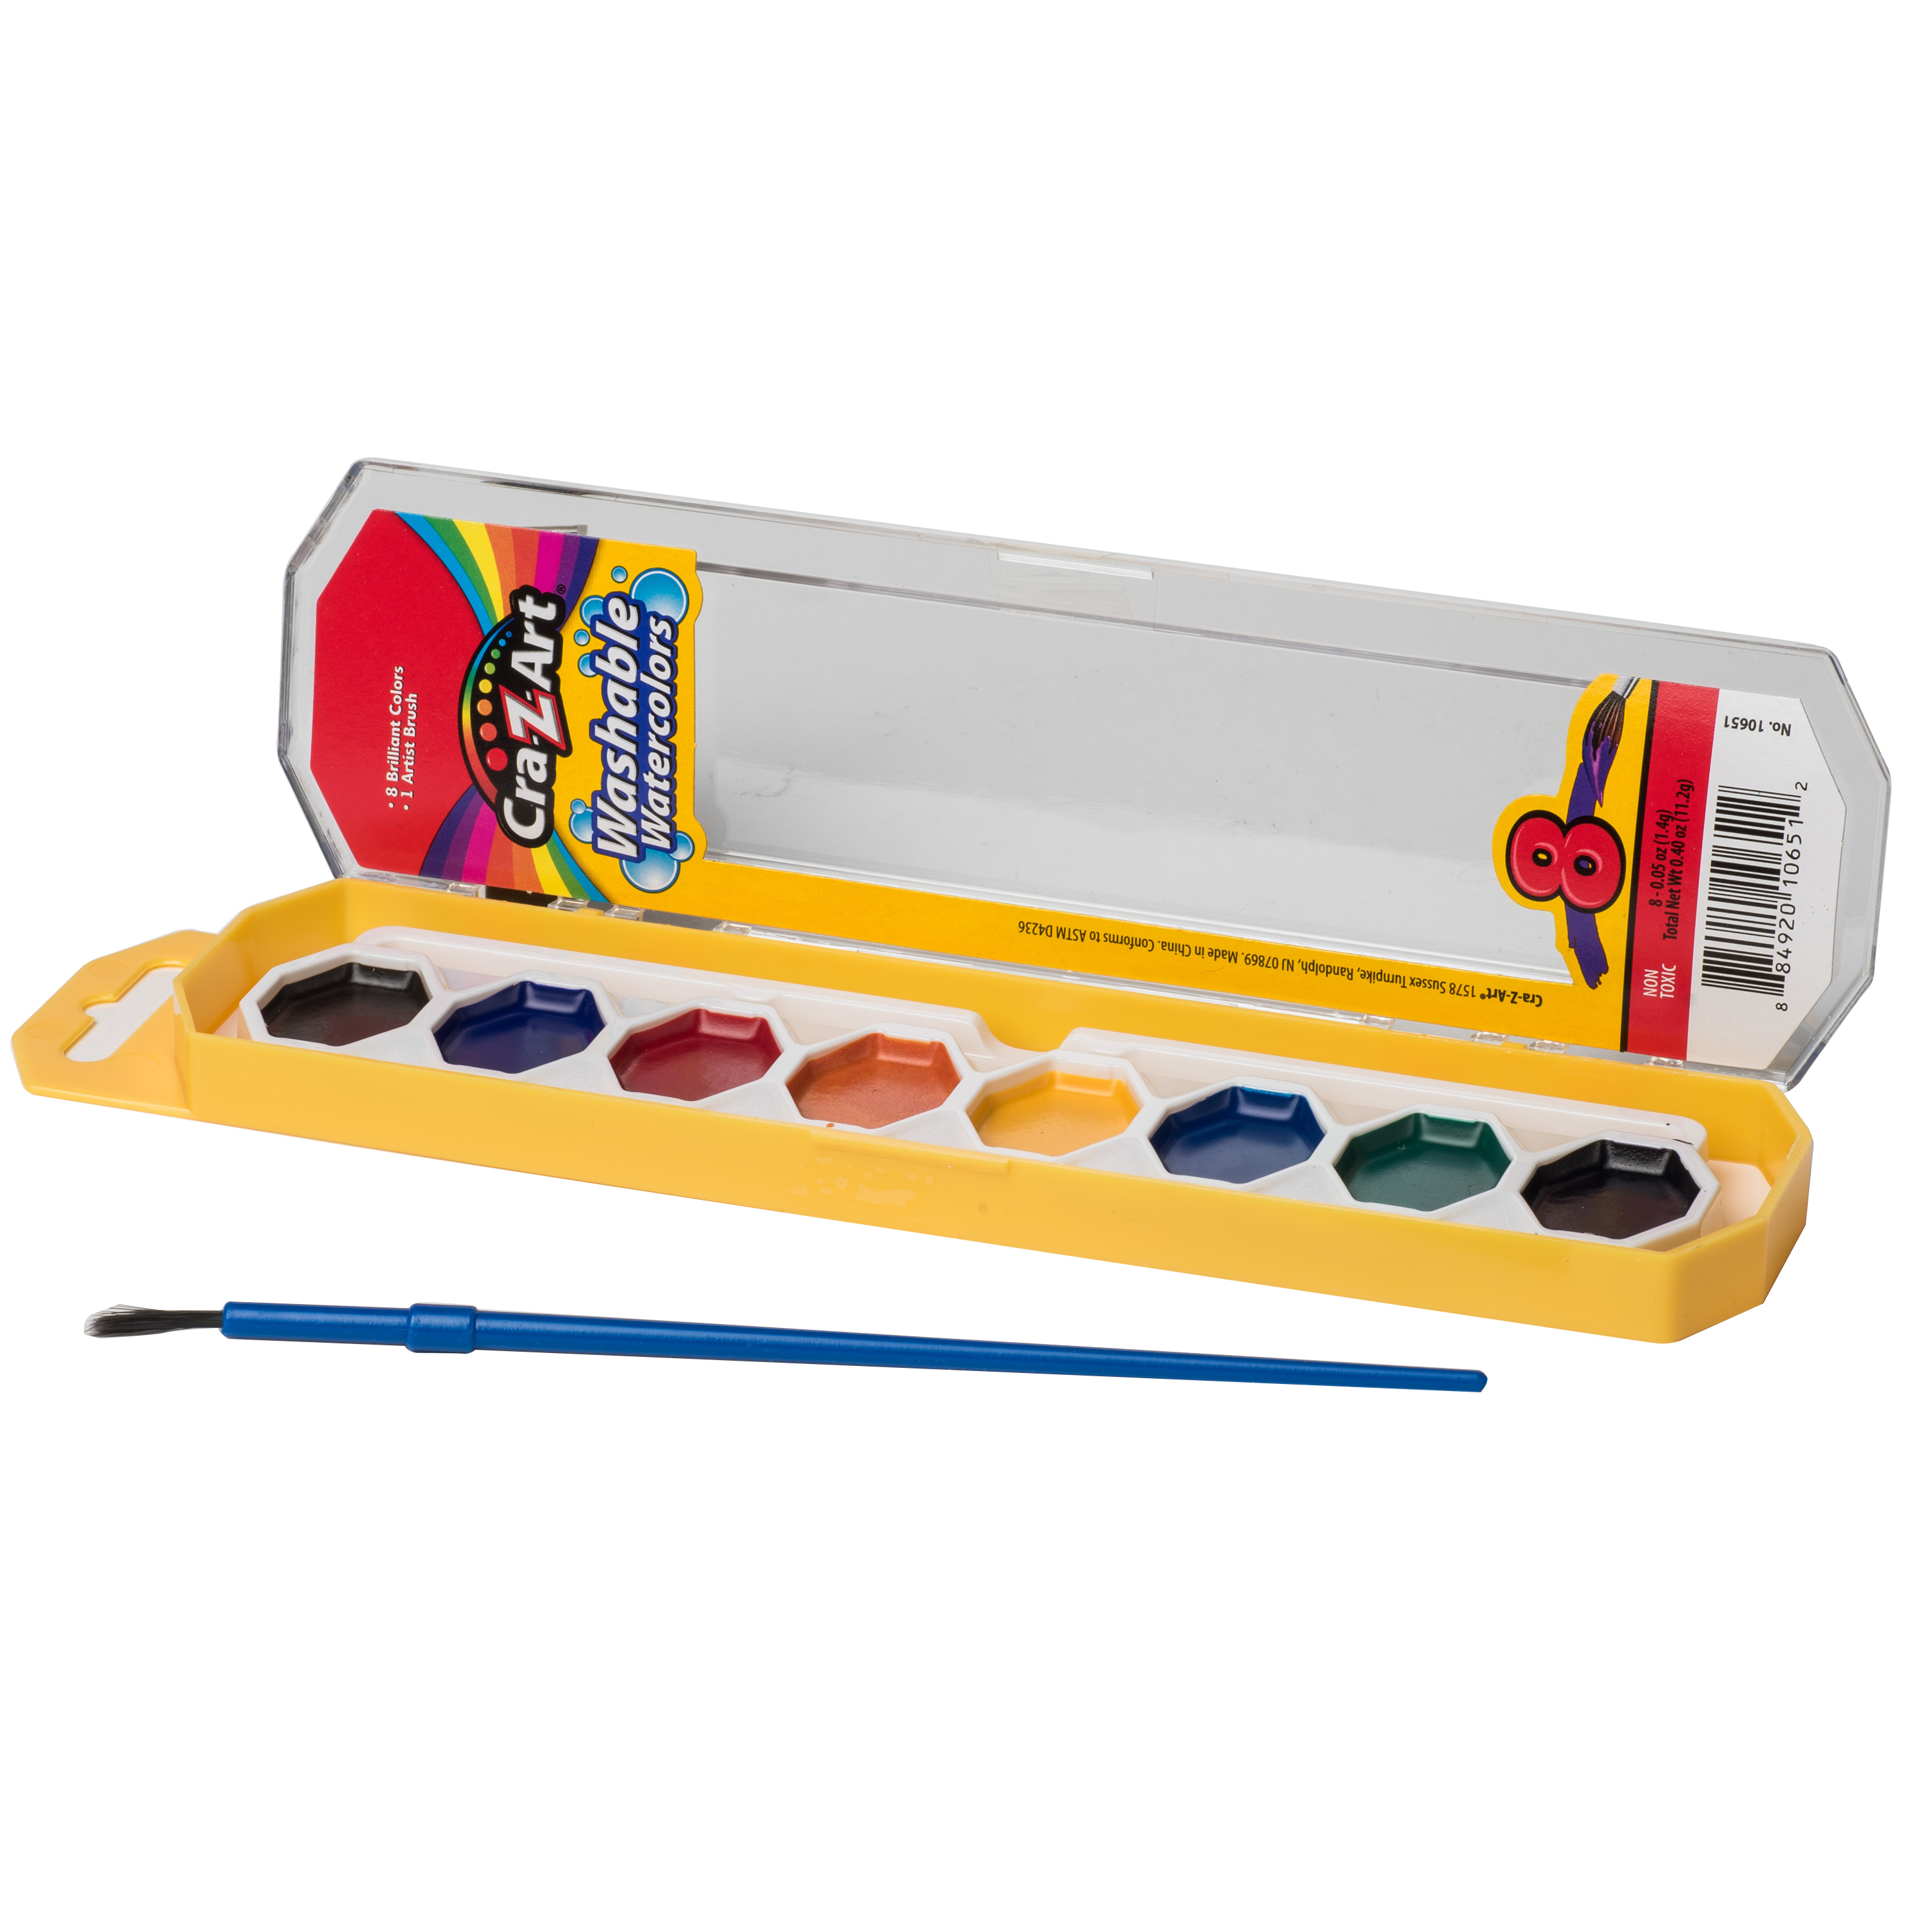 Cra-Z-Art 8 Count Washable Watercolor Paints with Brush, Multicolor, Child to Adult, Back to School - image 3 of 9